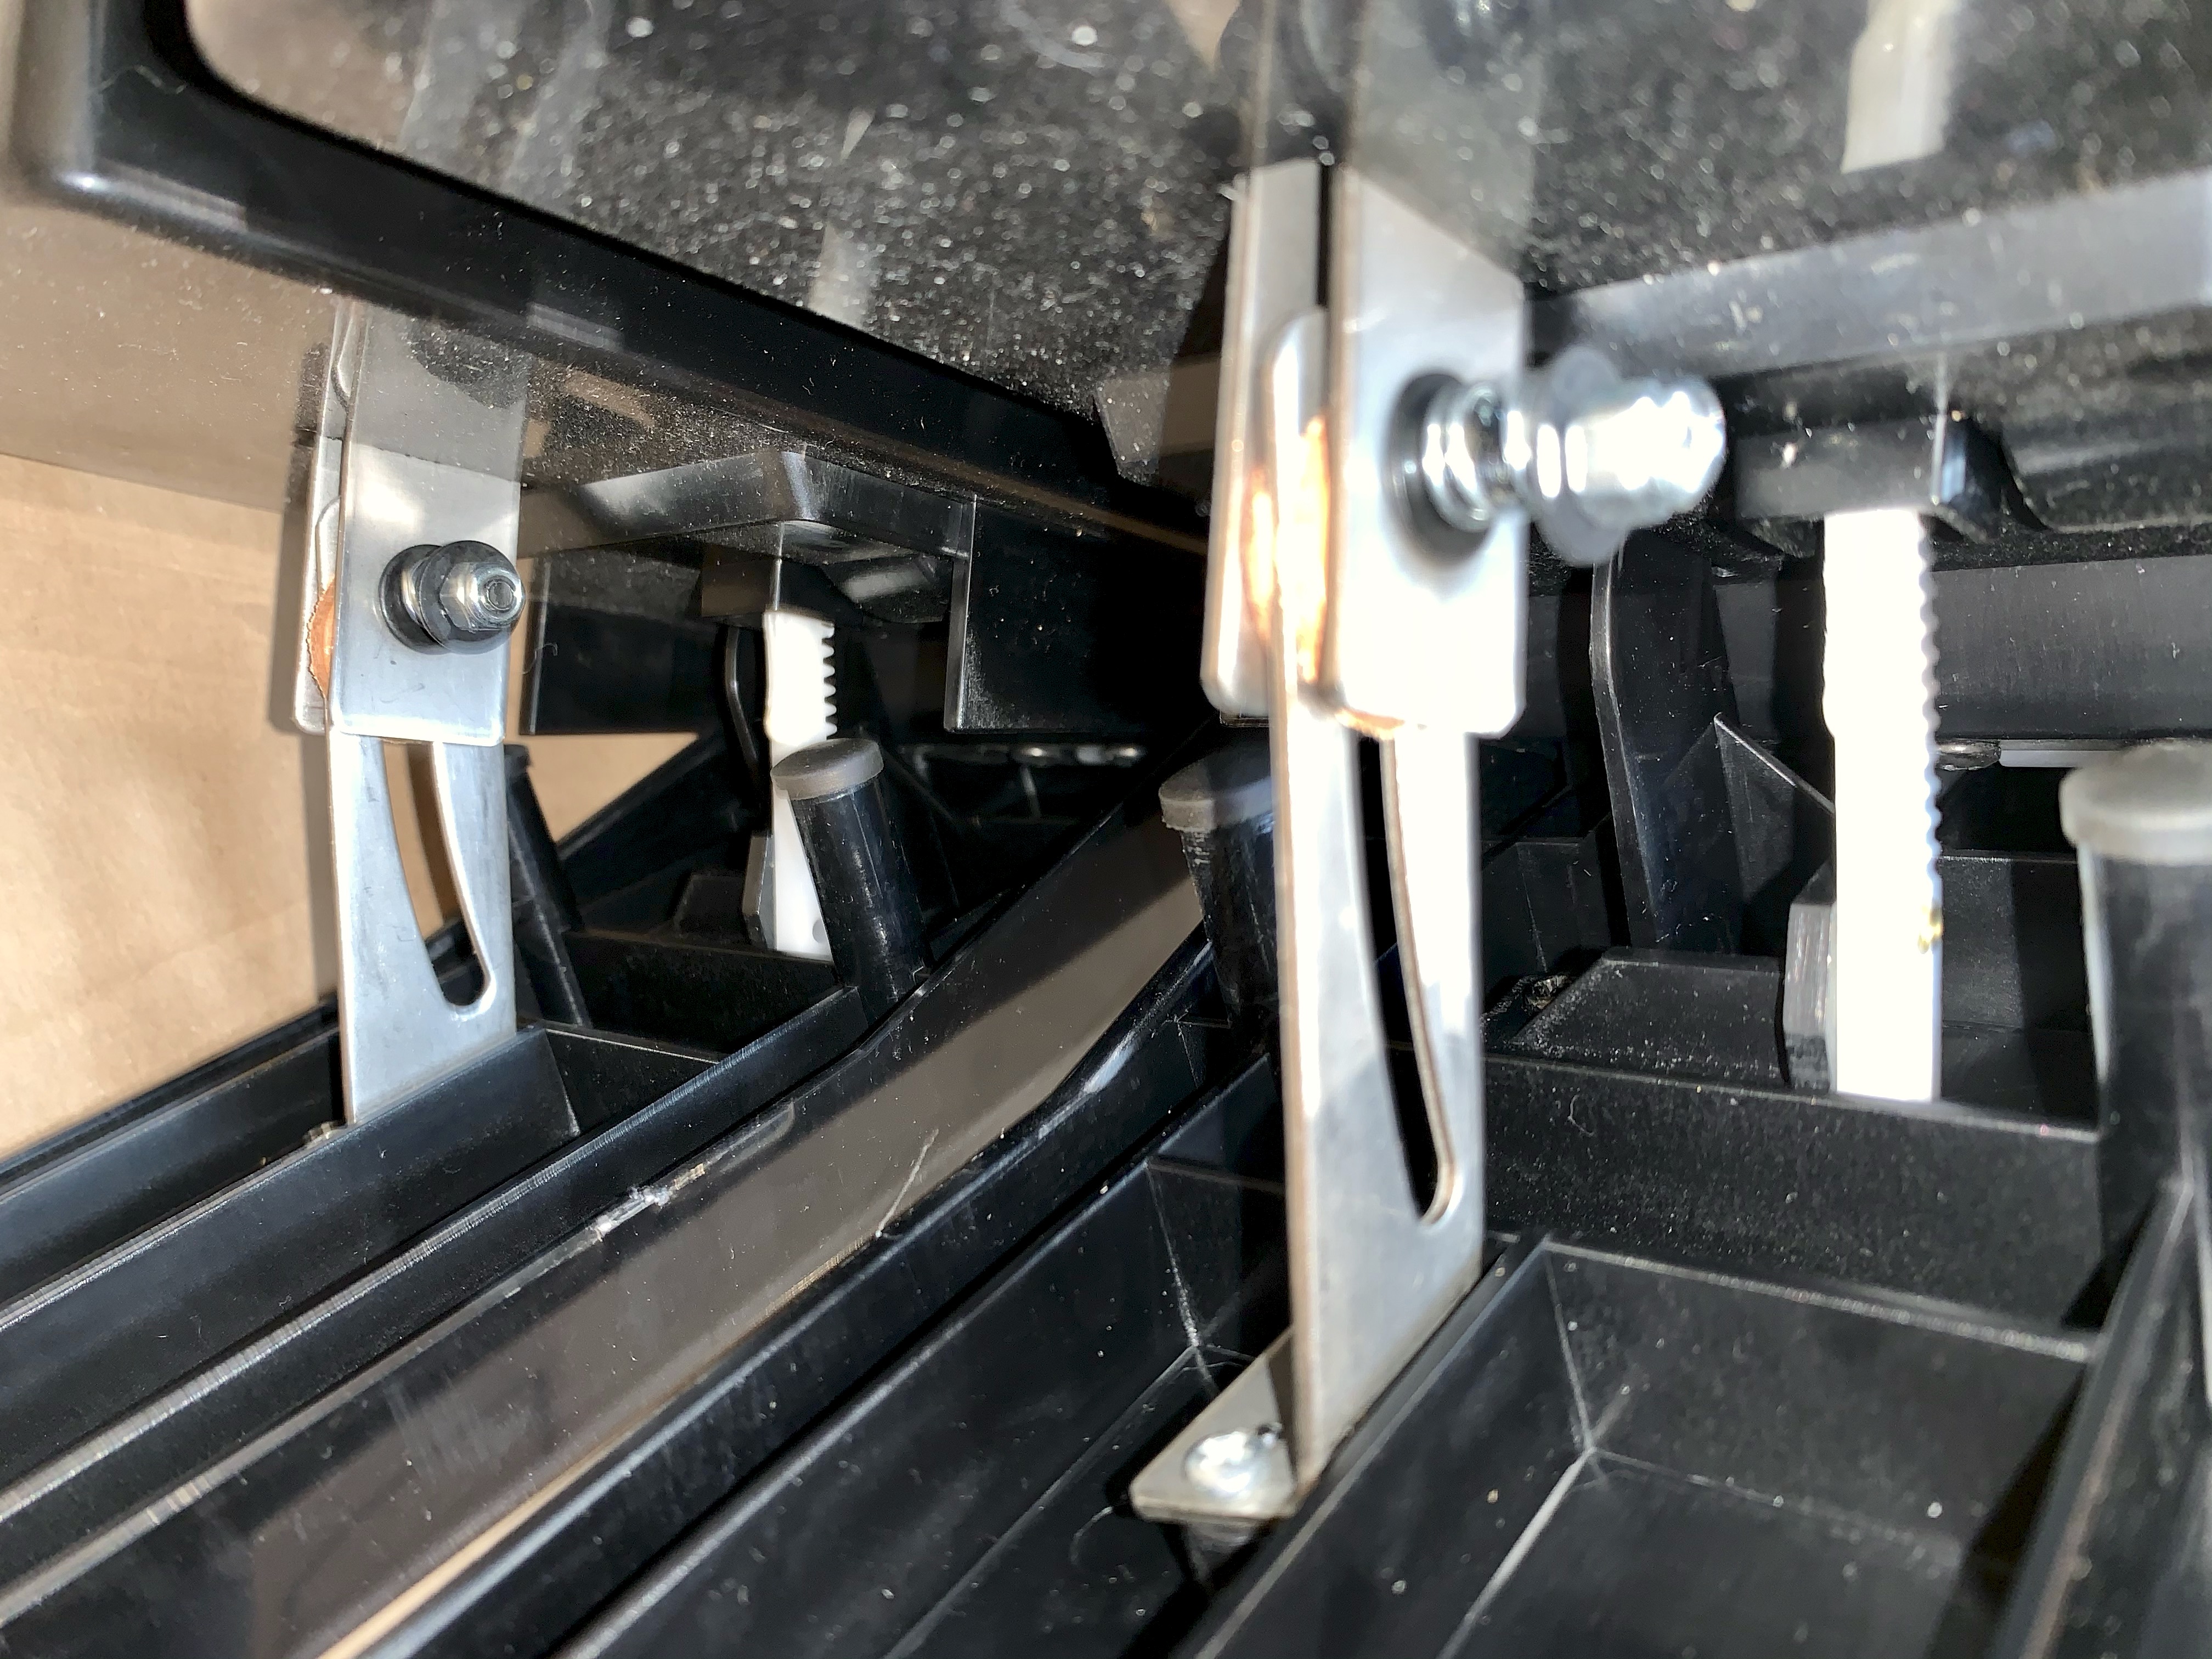 View of the Viscount hinge. You can tighten the pedal down by tightening the screw. There is a &lsquo;friction&rsquo; pad and a spring that helps keep the pedal in place.